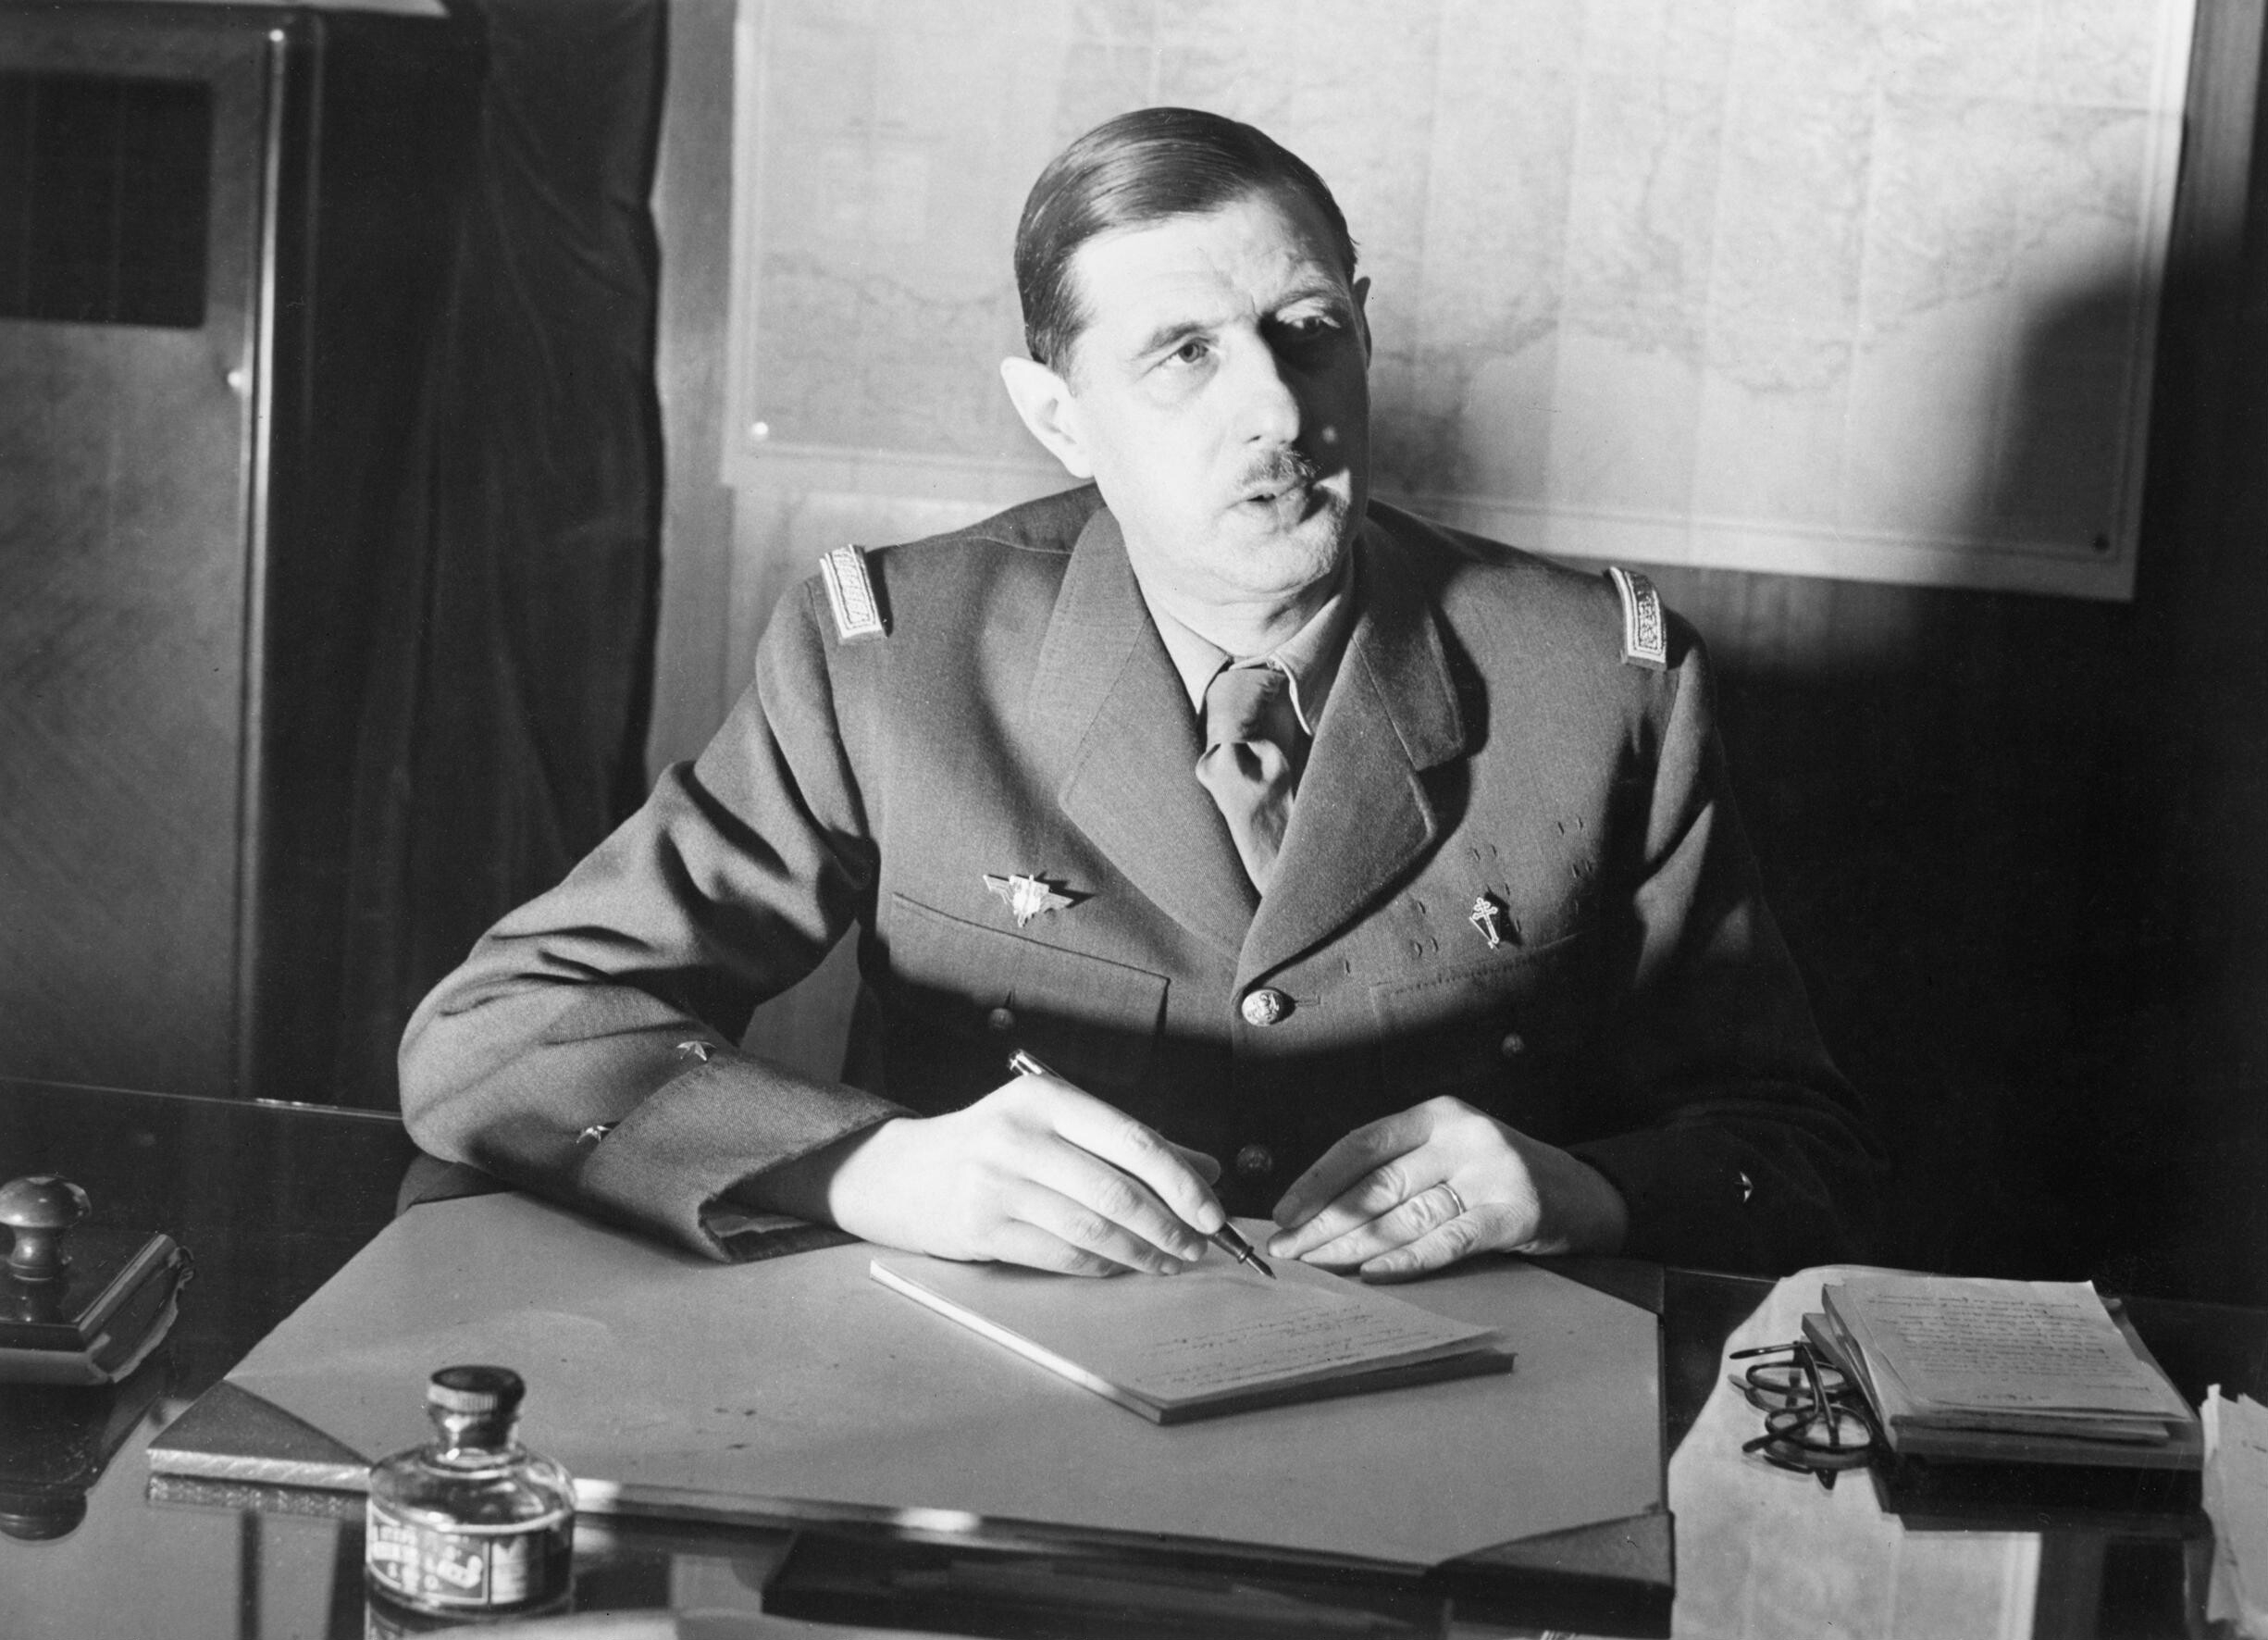 Commander of Free French Forces General Charles de Gaulle seated at his desk in London during the Second World War. D1973